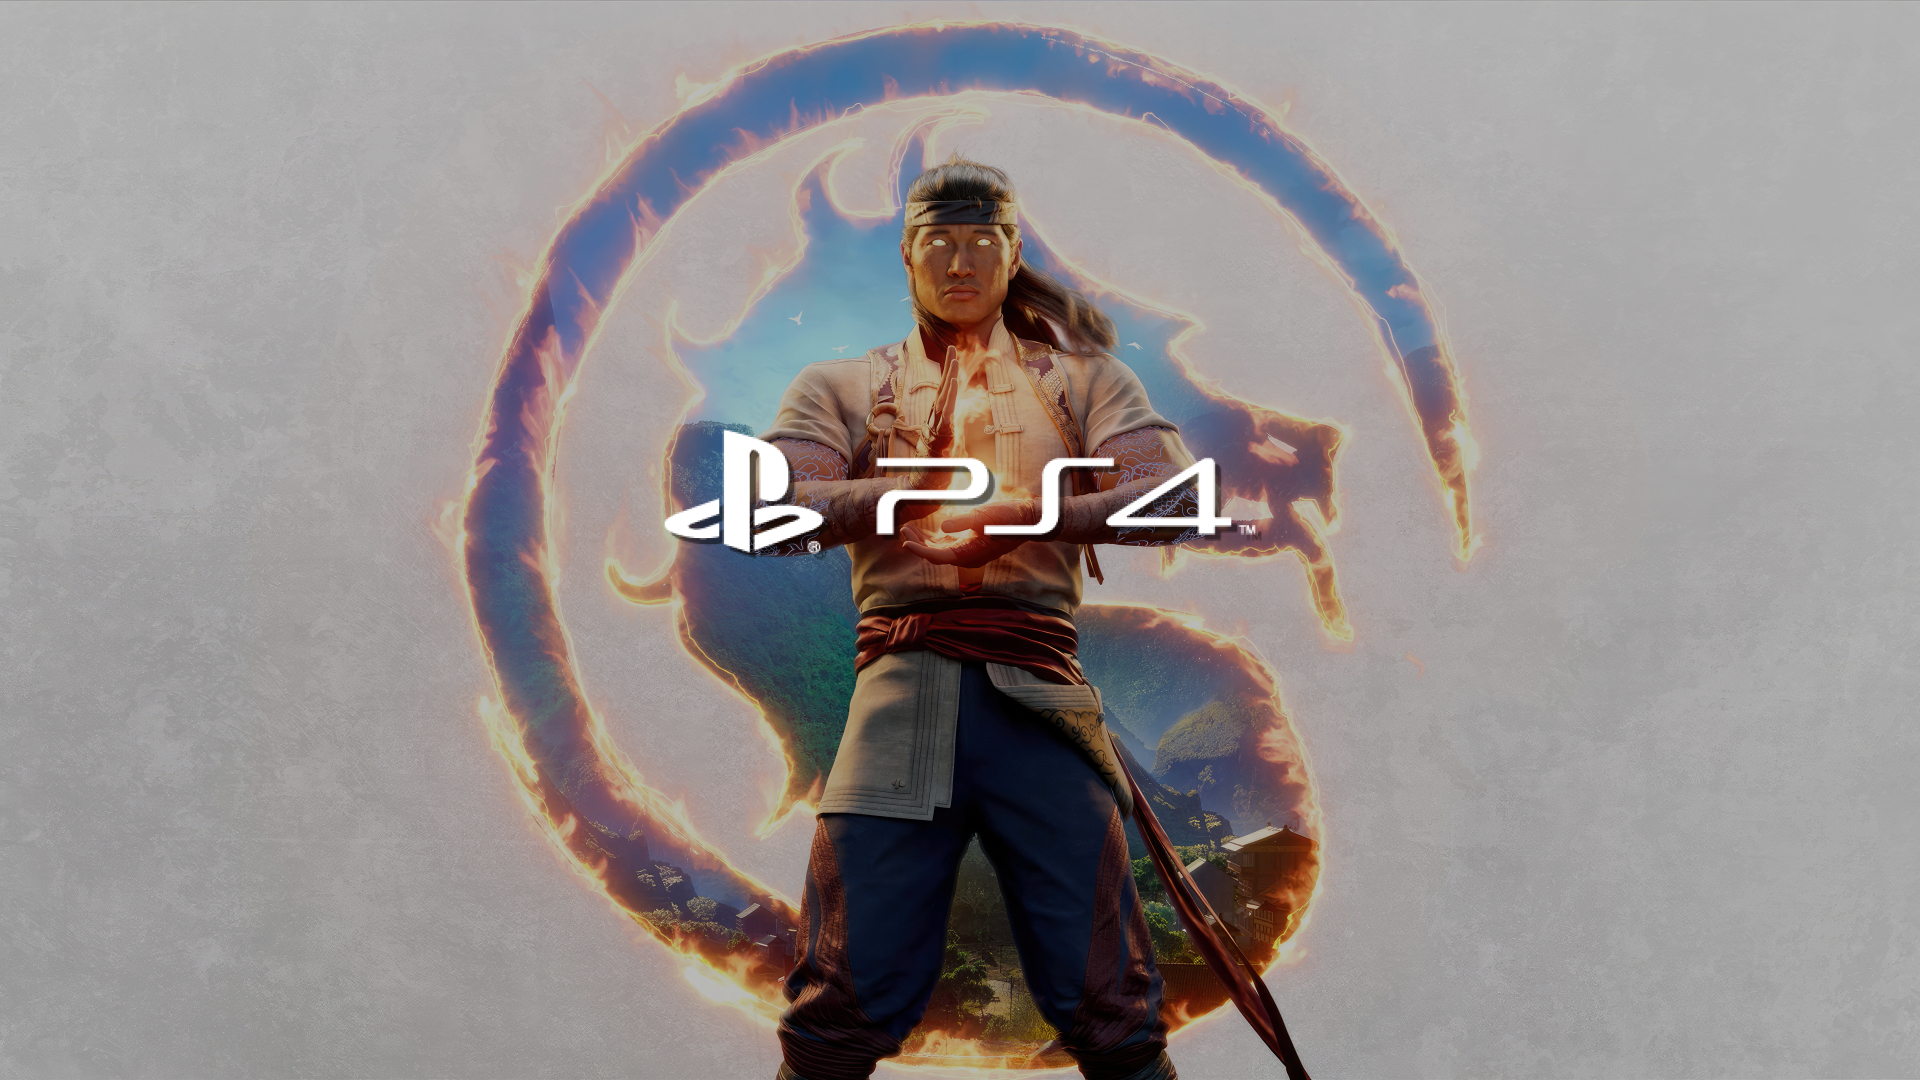 Mortal Kombat 1 PS4, Xbox One Versions: Is MK1 Coming to Last-Gen Consoles?  - GameRevolution